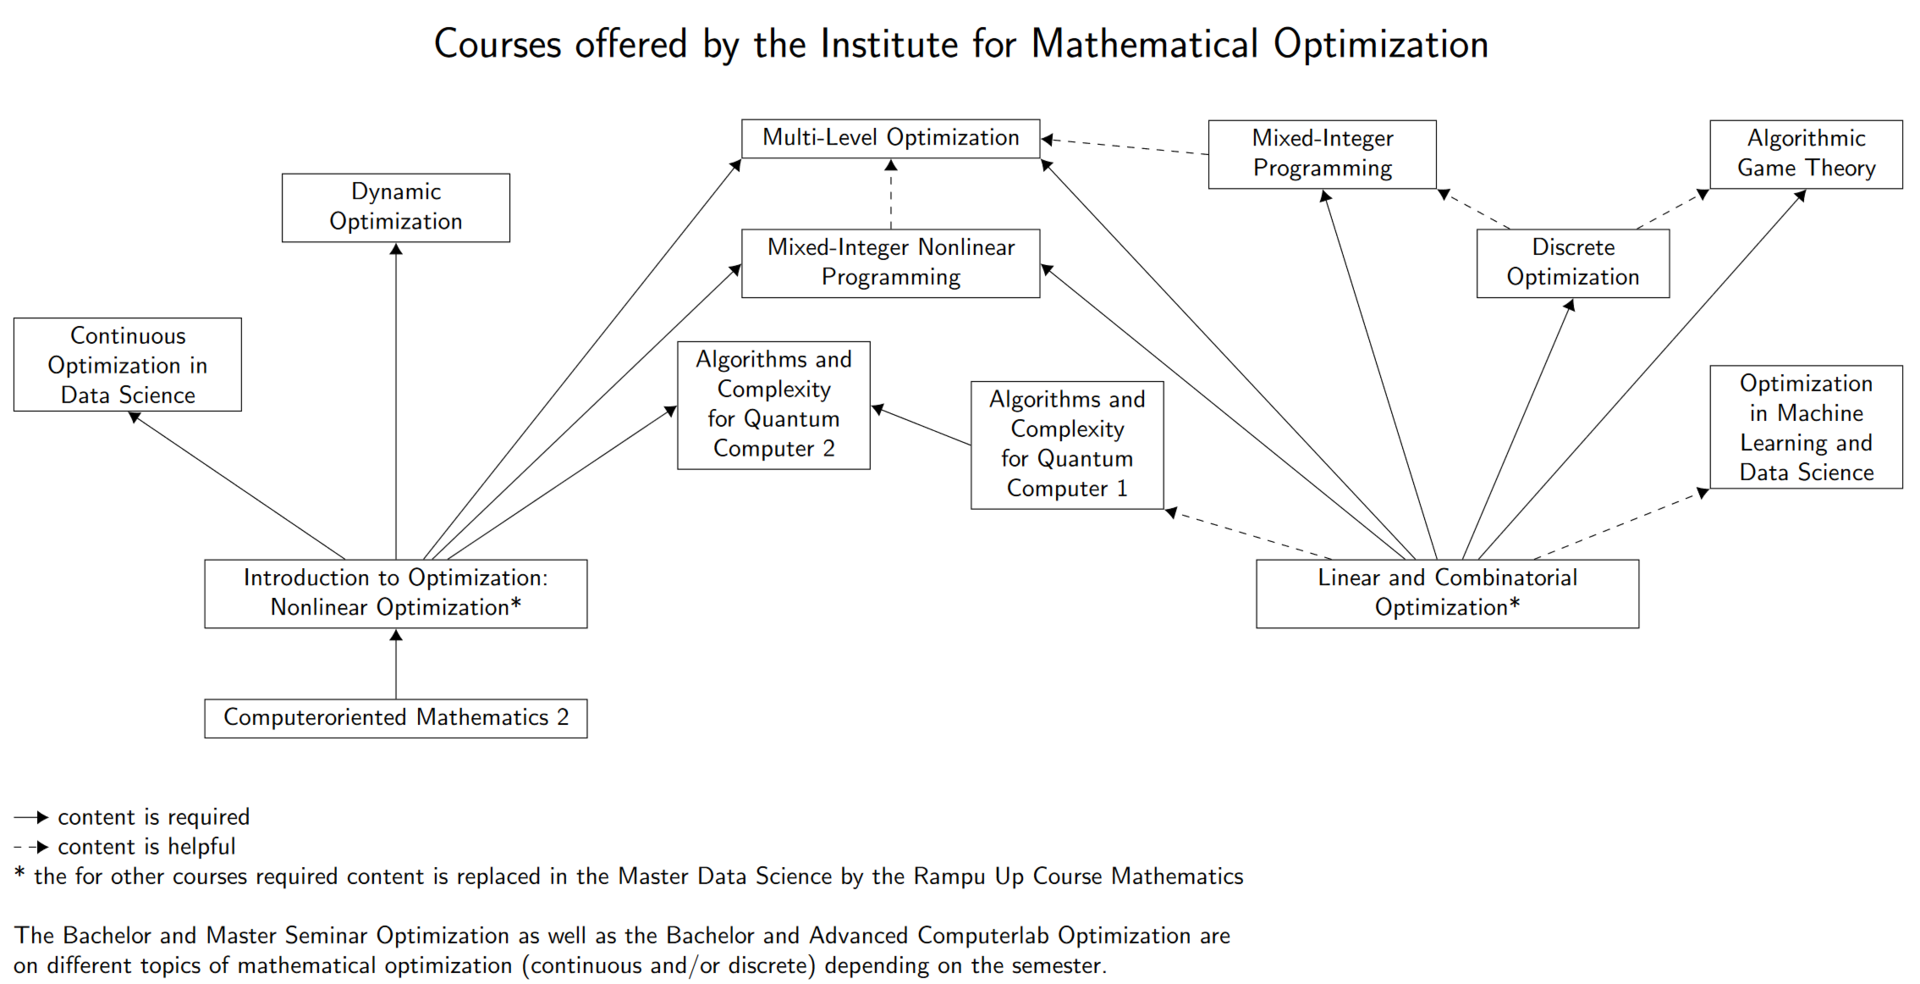 Teaching offered by the Institute for Mathematical Optimization